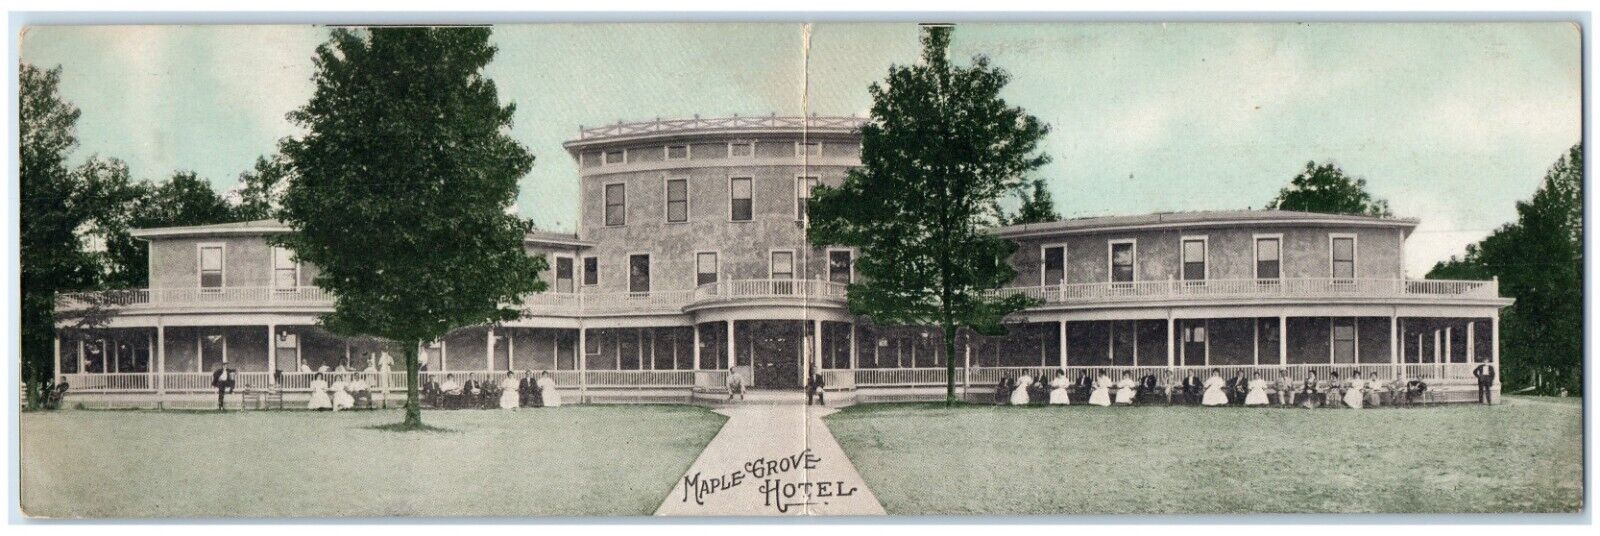 1908 Front View Of Maple Grove Hotel Building Chillicothe Ohio OH Postcard